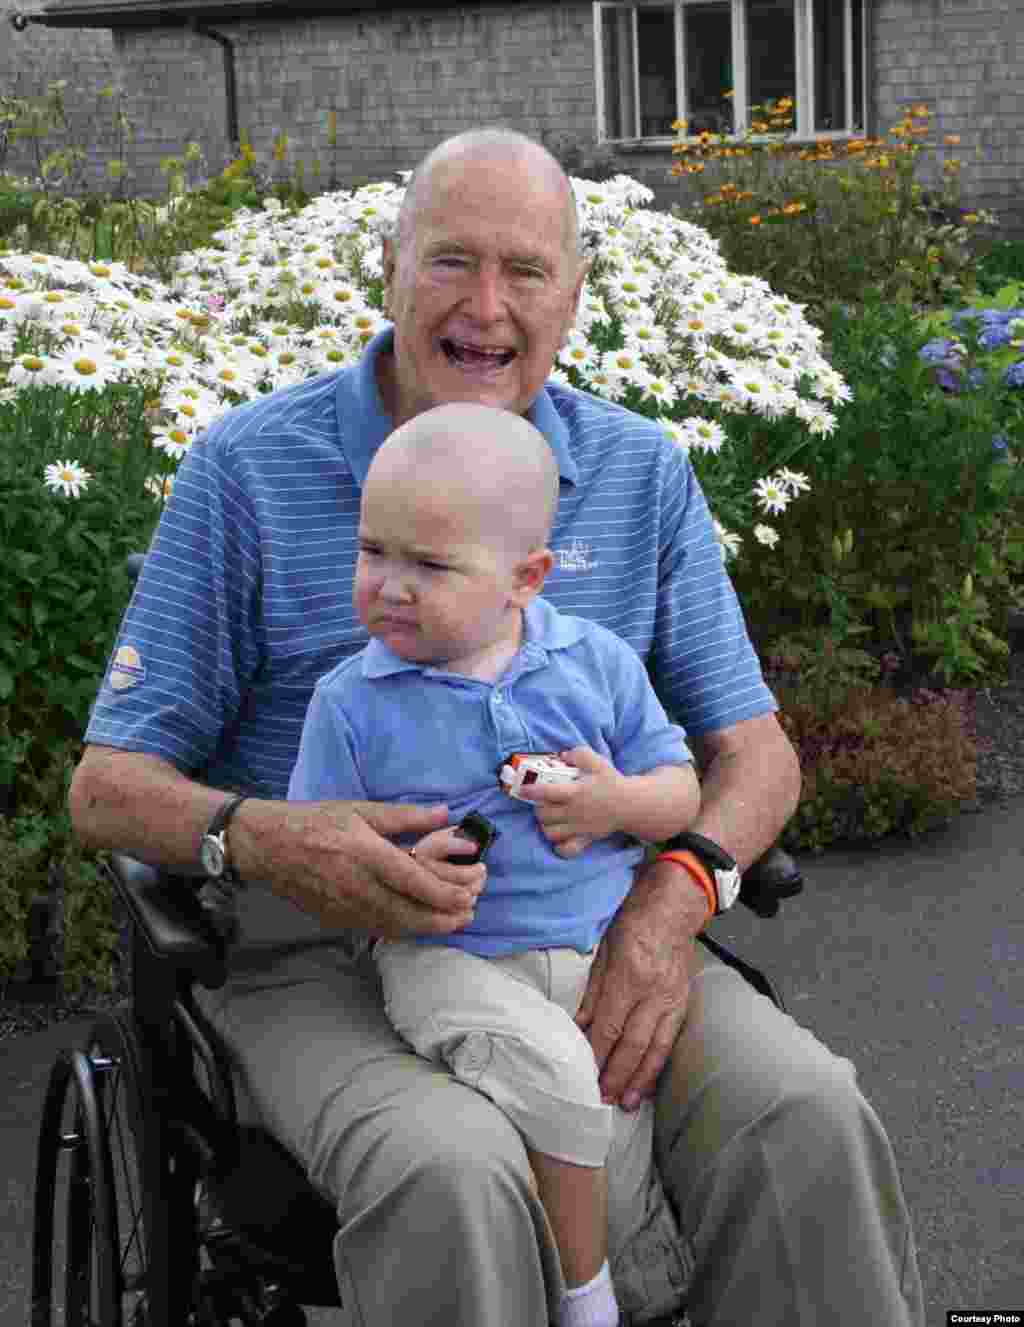 Former U.S. President George H.W. Bush pictured with Patrick, the son of a member of his security detail who is suffering from leukemia. Bush and his security team shaved their heads in support of Patrick, whose last name has been withheld. (Photo credit: Office of George HW Bush)